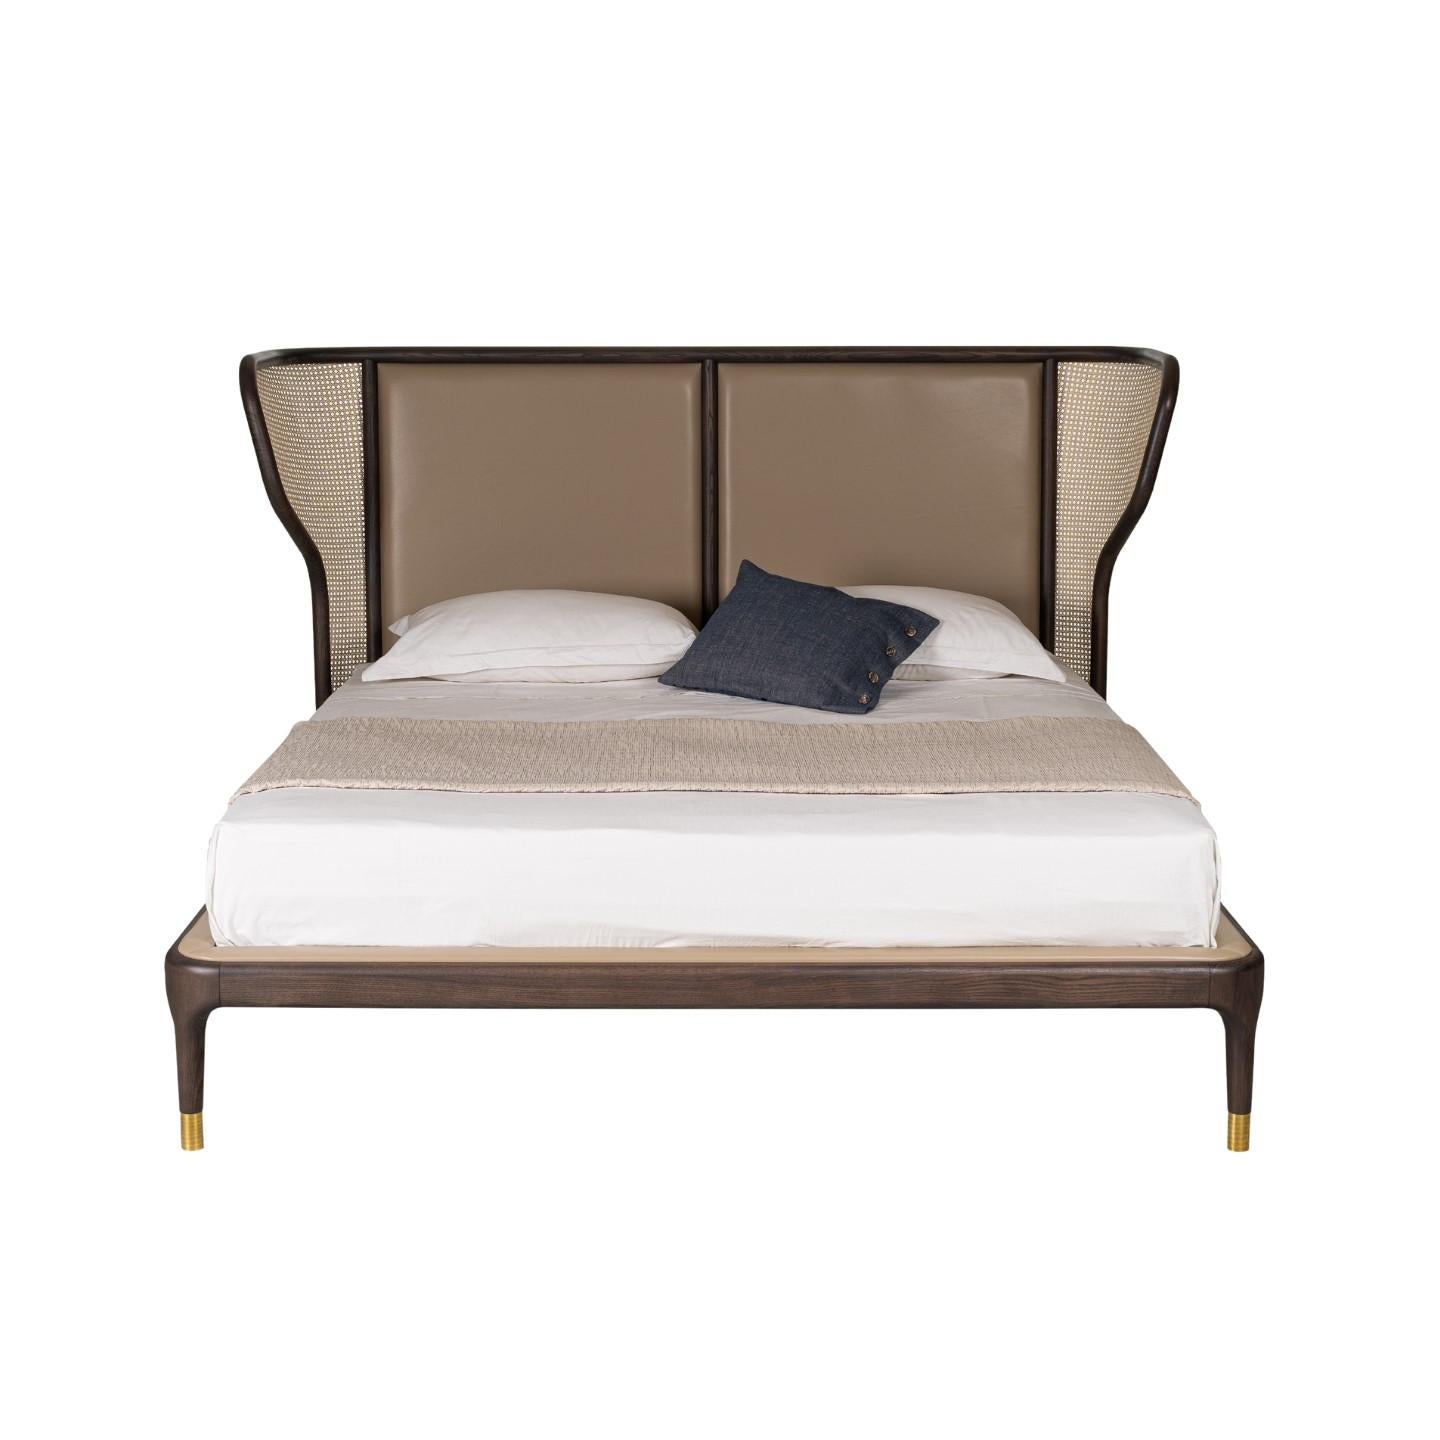 Contemporary Joyce bed by Morelato, solid Ash wood and Straw, Upholstered Headboard For Sale